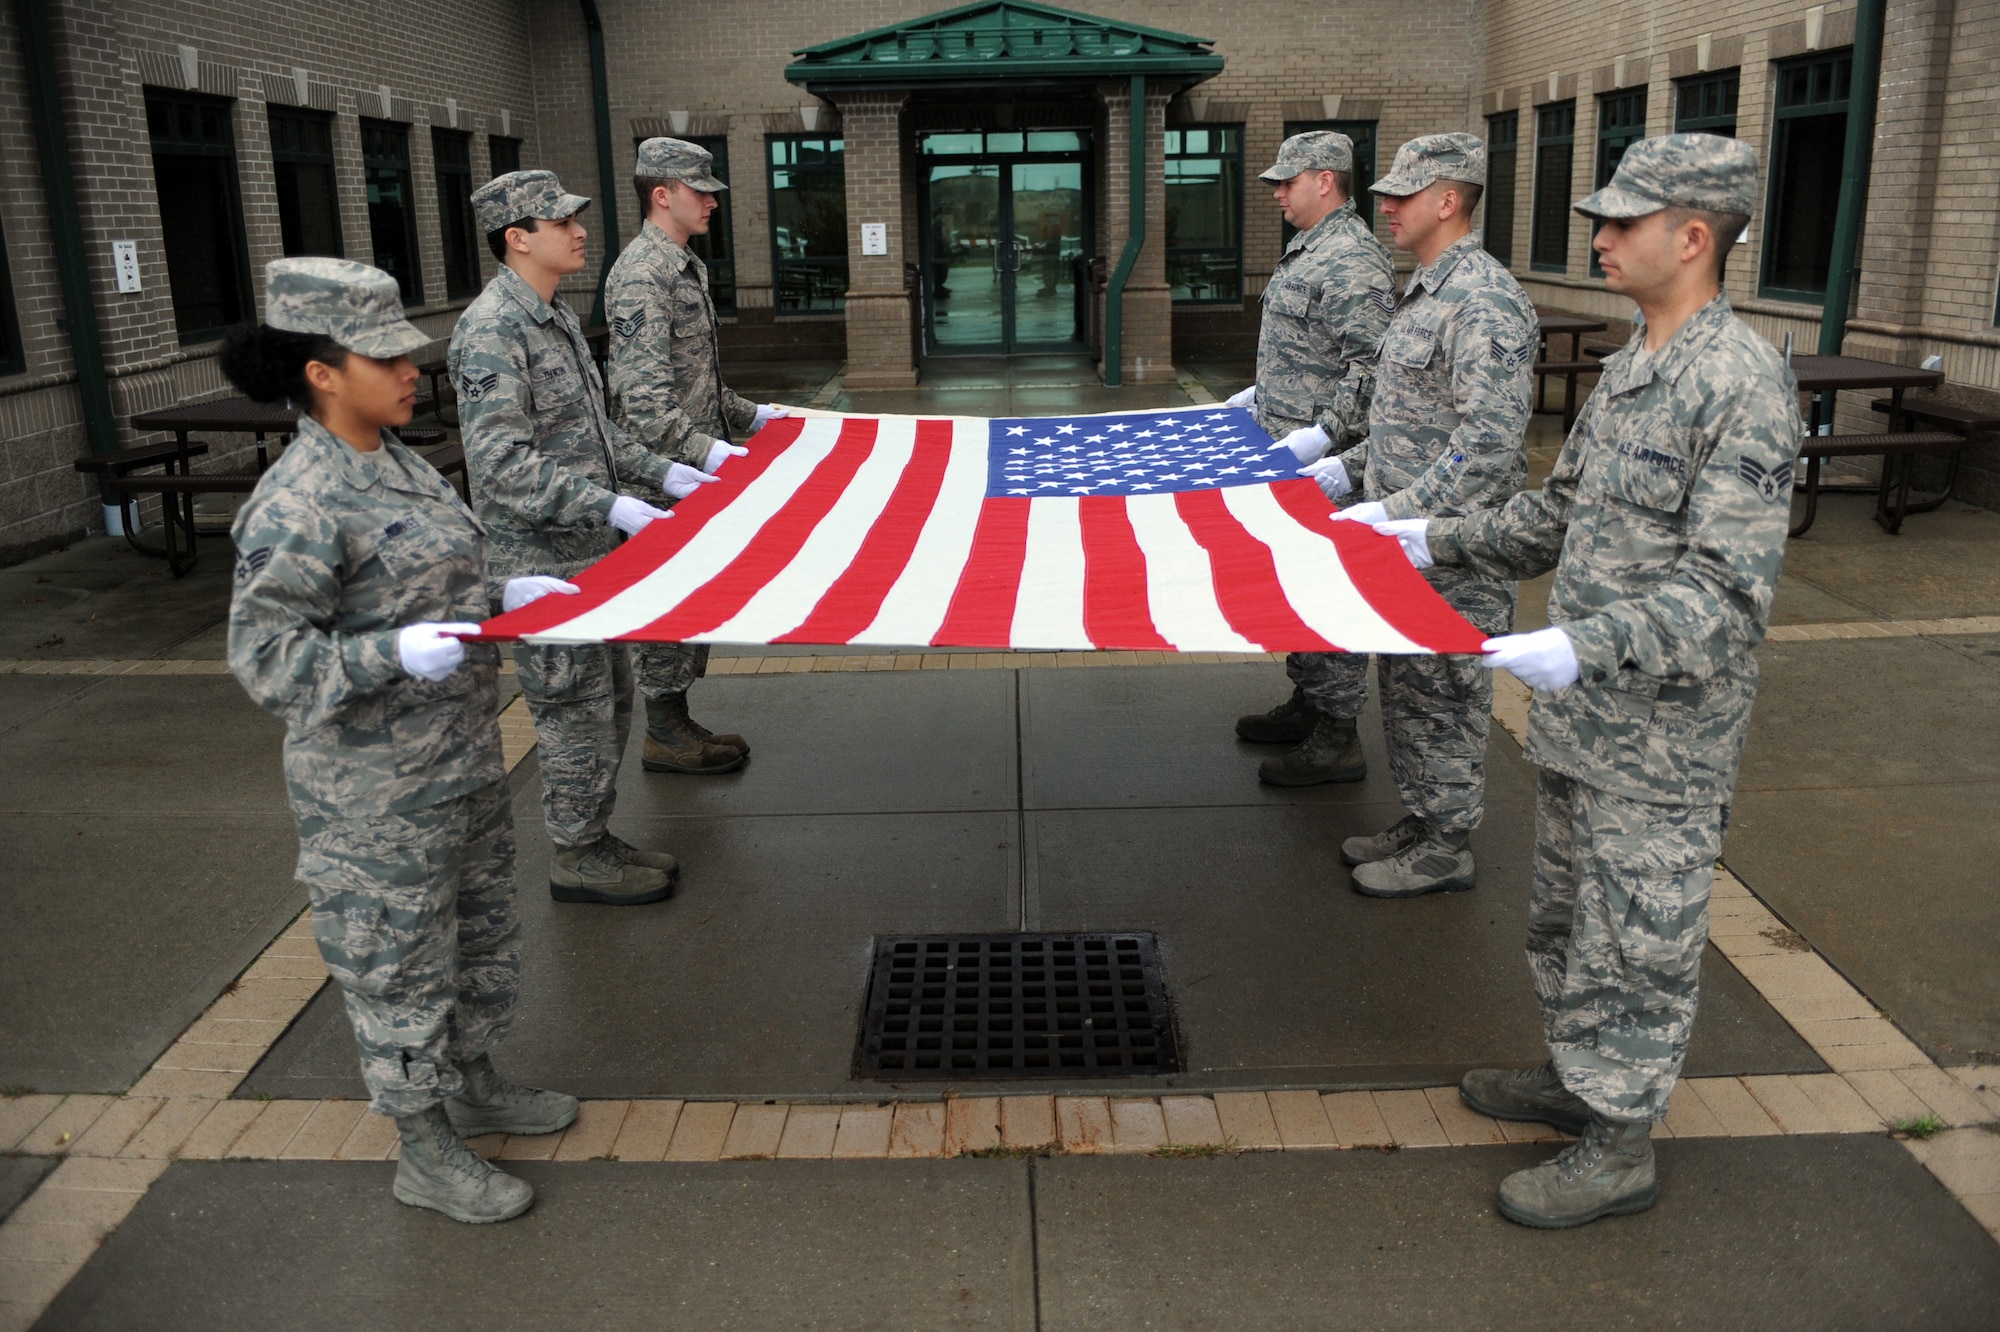 WESTHAMPTON BEACH, NY - Members of the 106th Rescue Wing Honor Guard participate in a flag ceremony during training on October 16, 2014 at FS Gabreski ANG.
